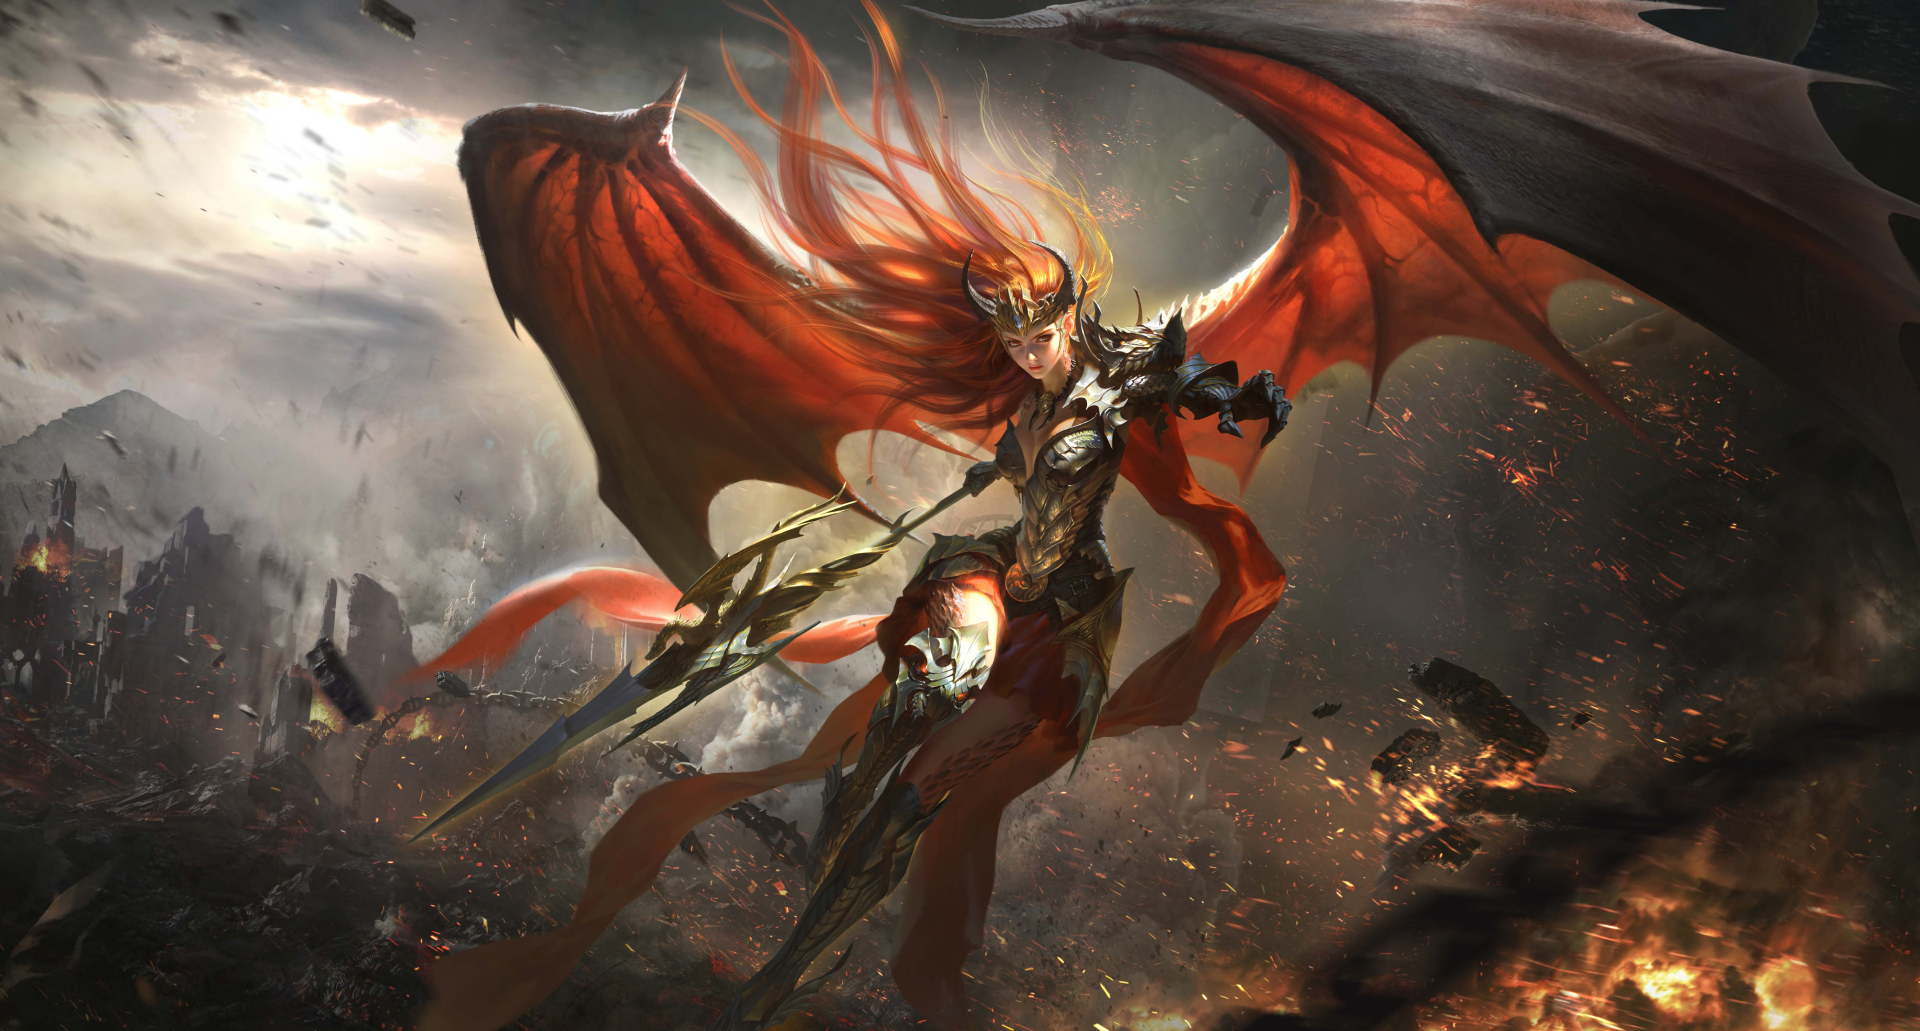 542624 1920x1080 free wallpaper and screensavers for league of angels JPG  306 kB - Rare Gallery HD Wallpapers